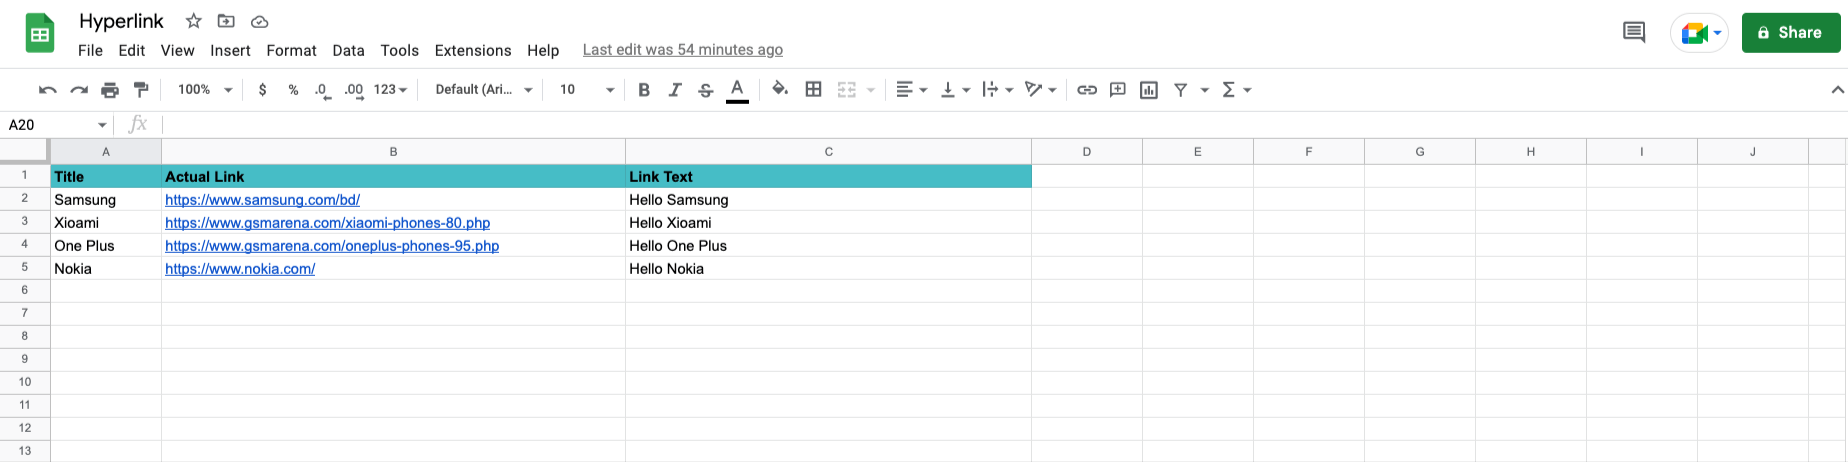 google sheets data in table